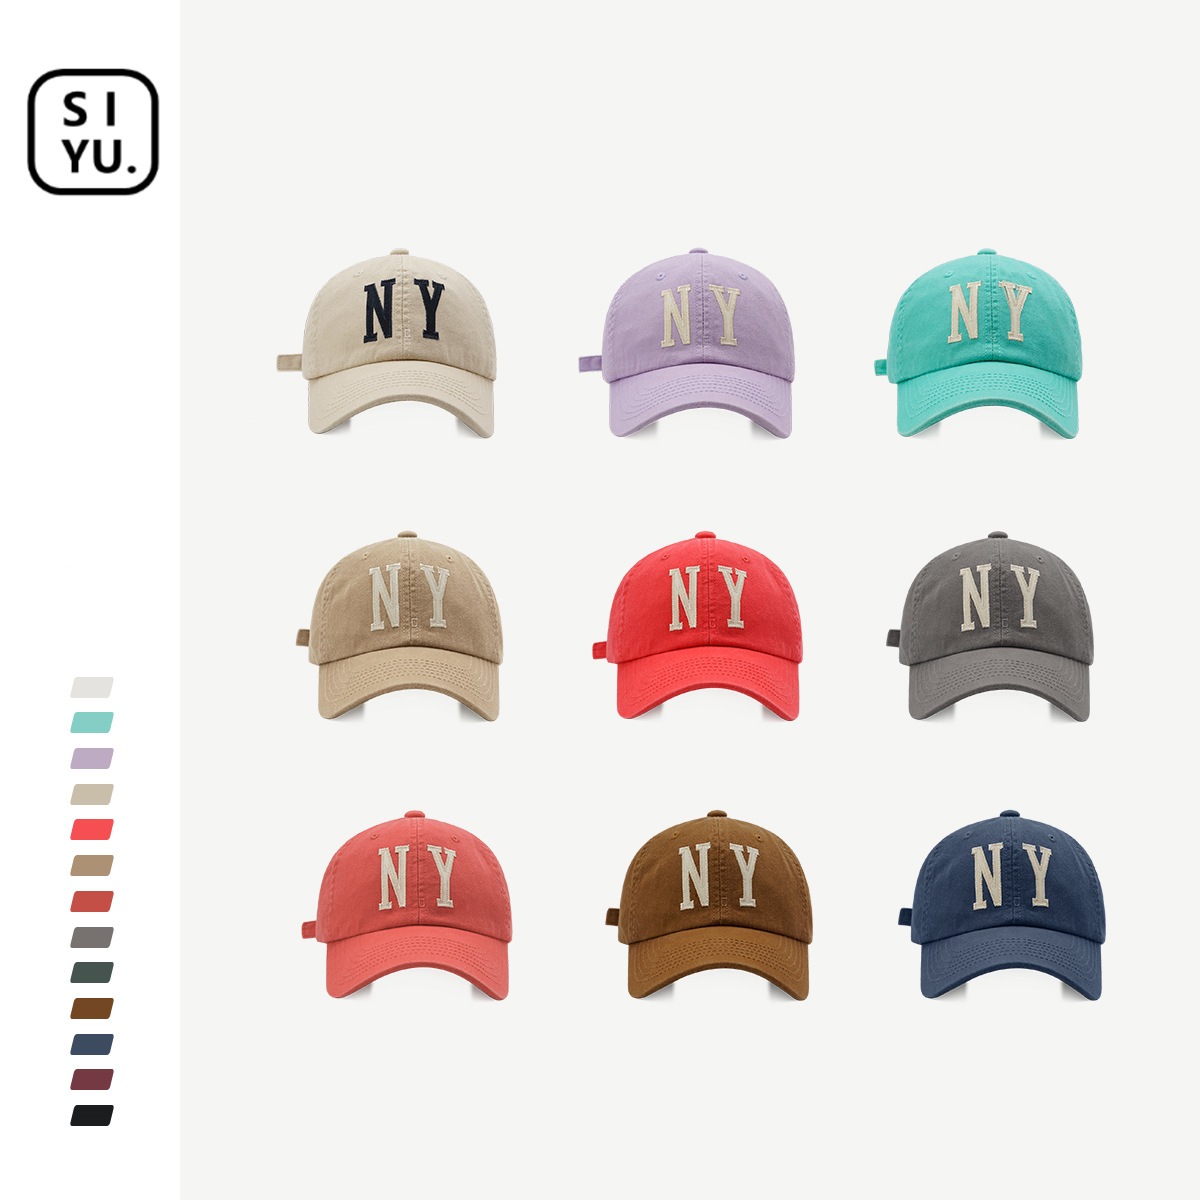 2022 Korean Fashion Brand NY Letter Soft Top Baseball Cap Men's Street Shooting Spring Summer Simplicity Face-Looking Small Peaked Cap for Children